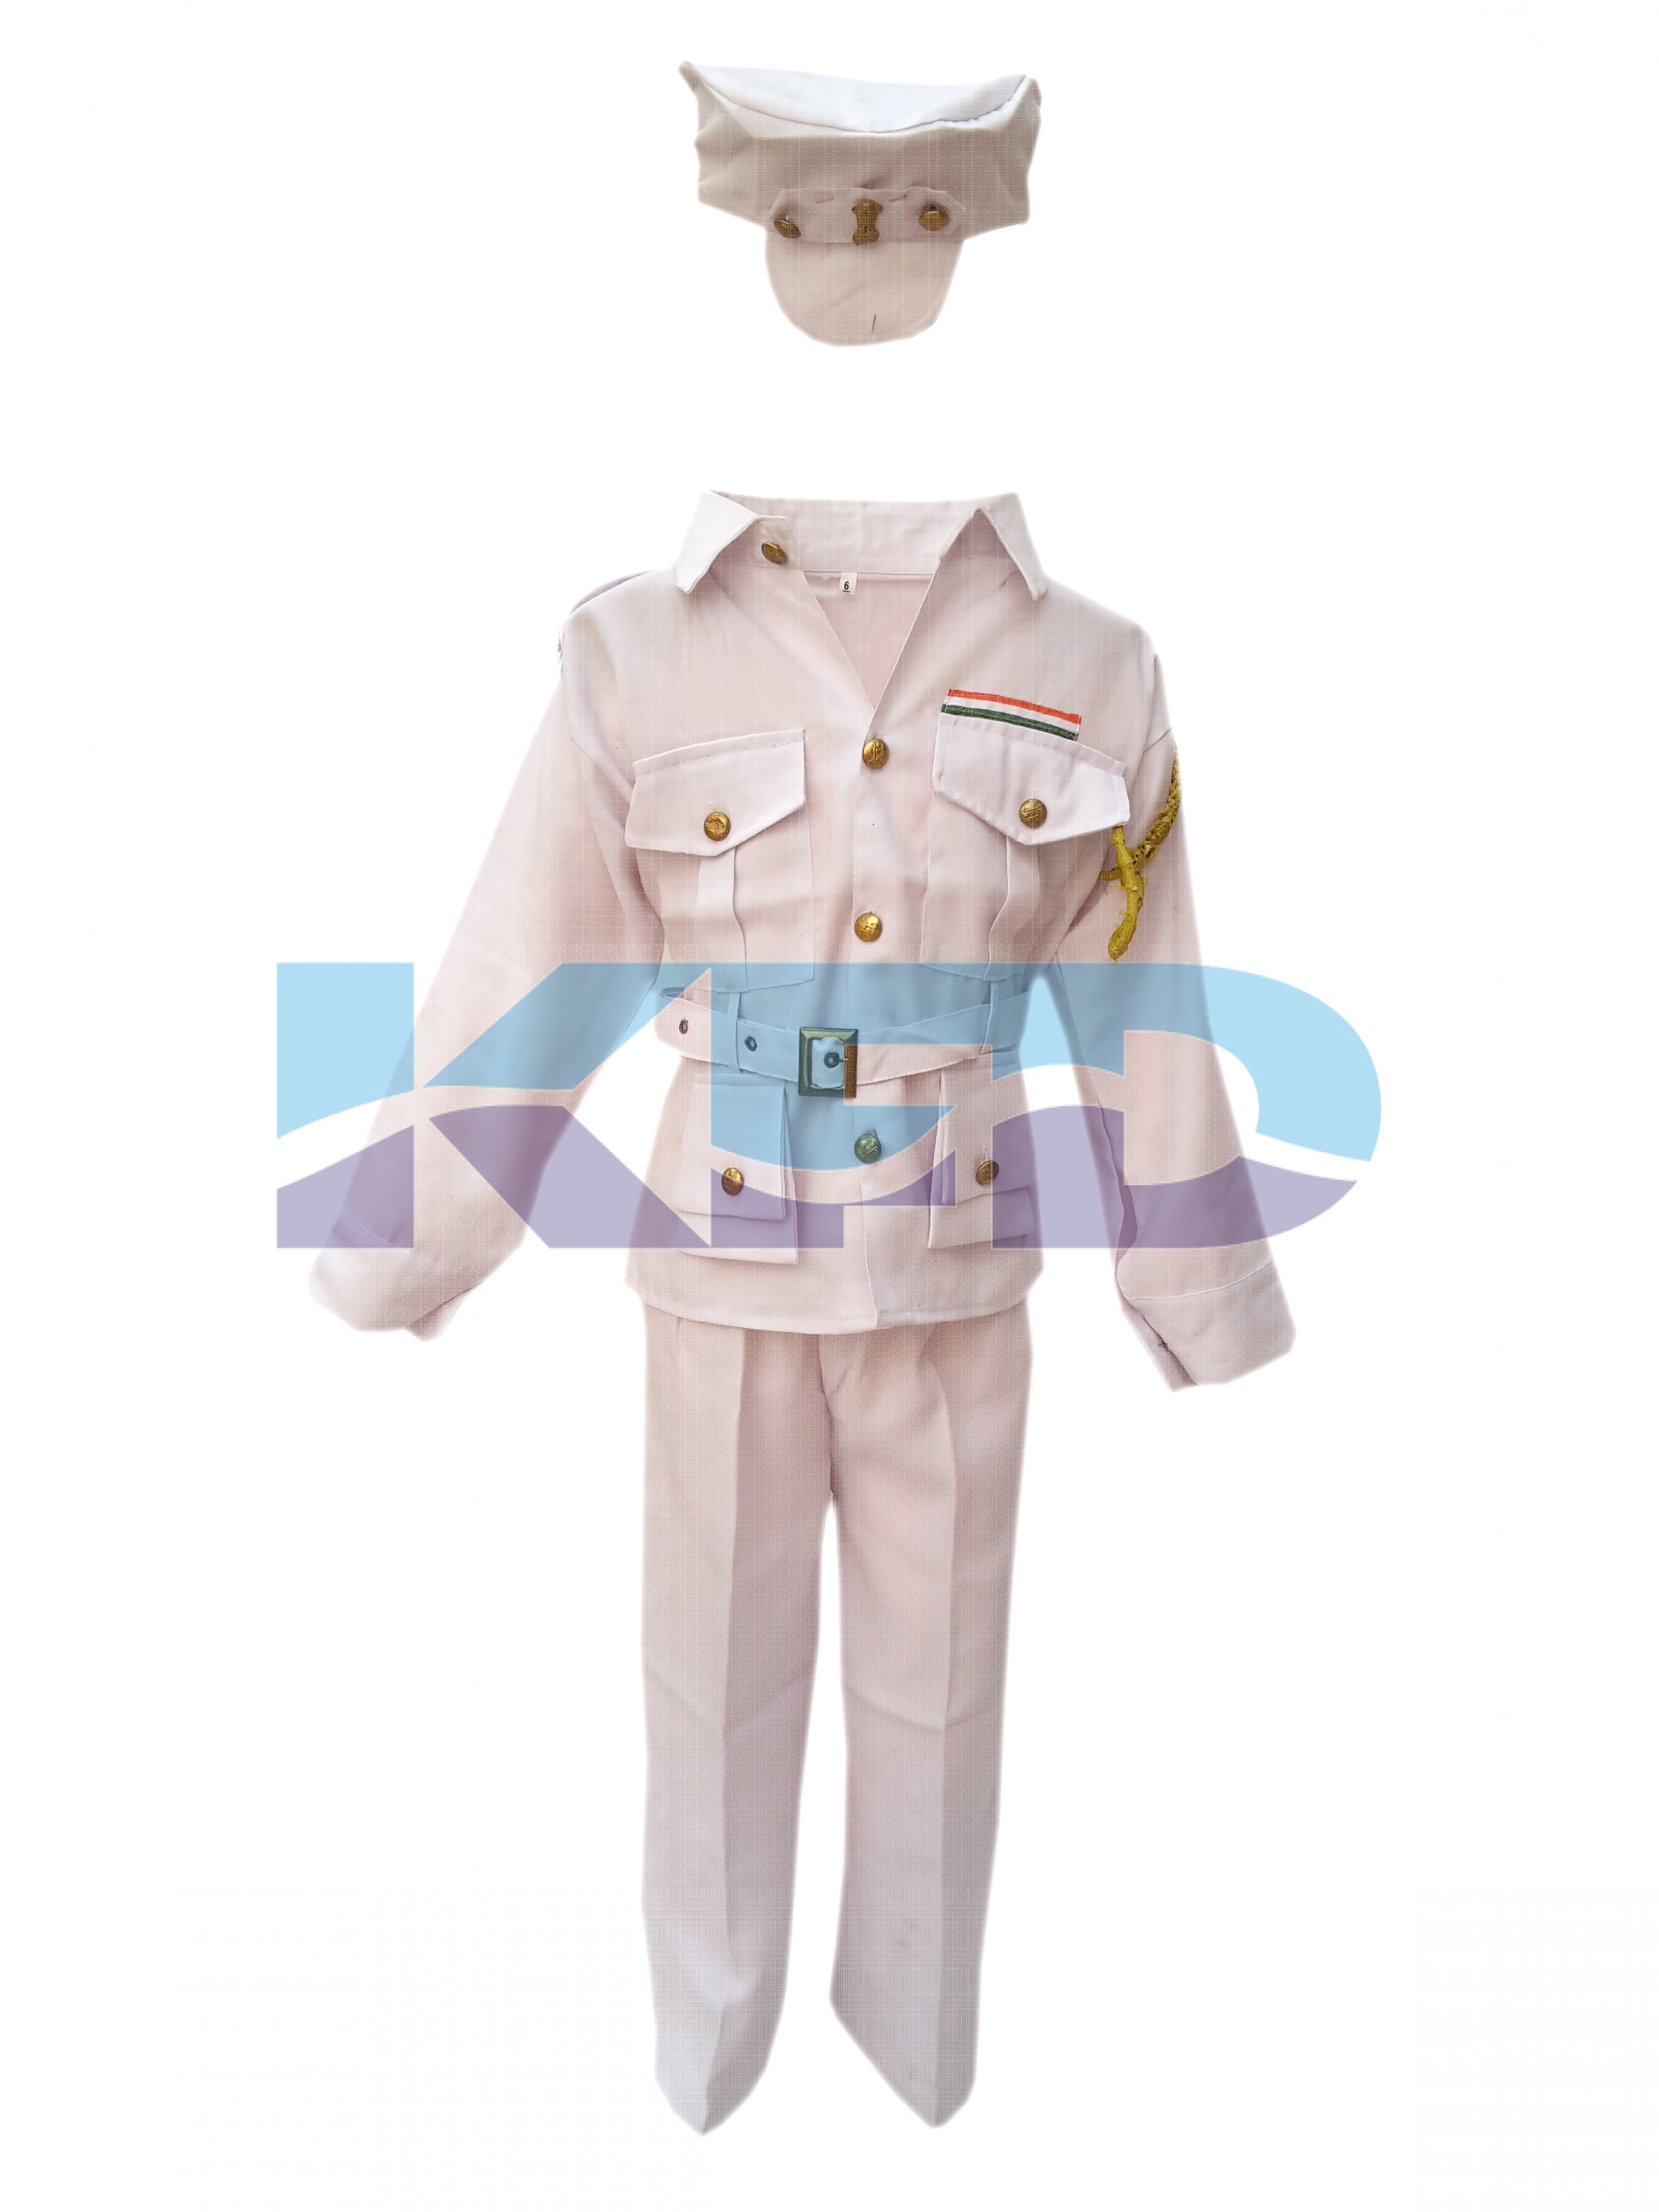 Indian Navy Fancy Dress For Kids,Our Helper/National Hero Costume For Annual Function/Theme Party/Competition/Stage Shows Dress